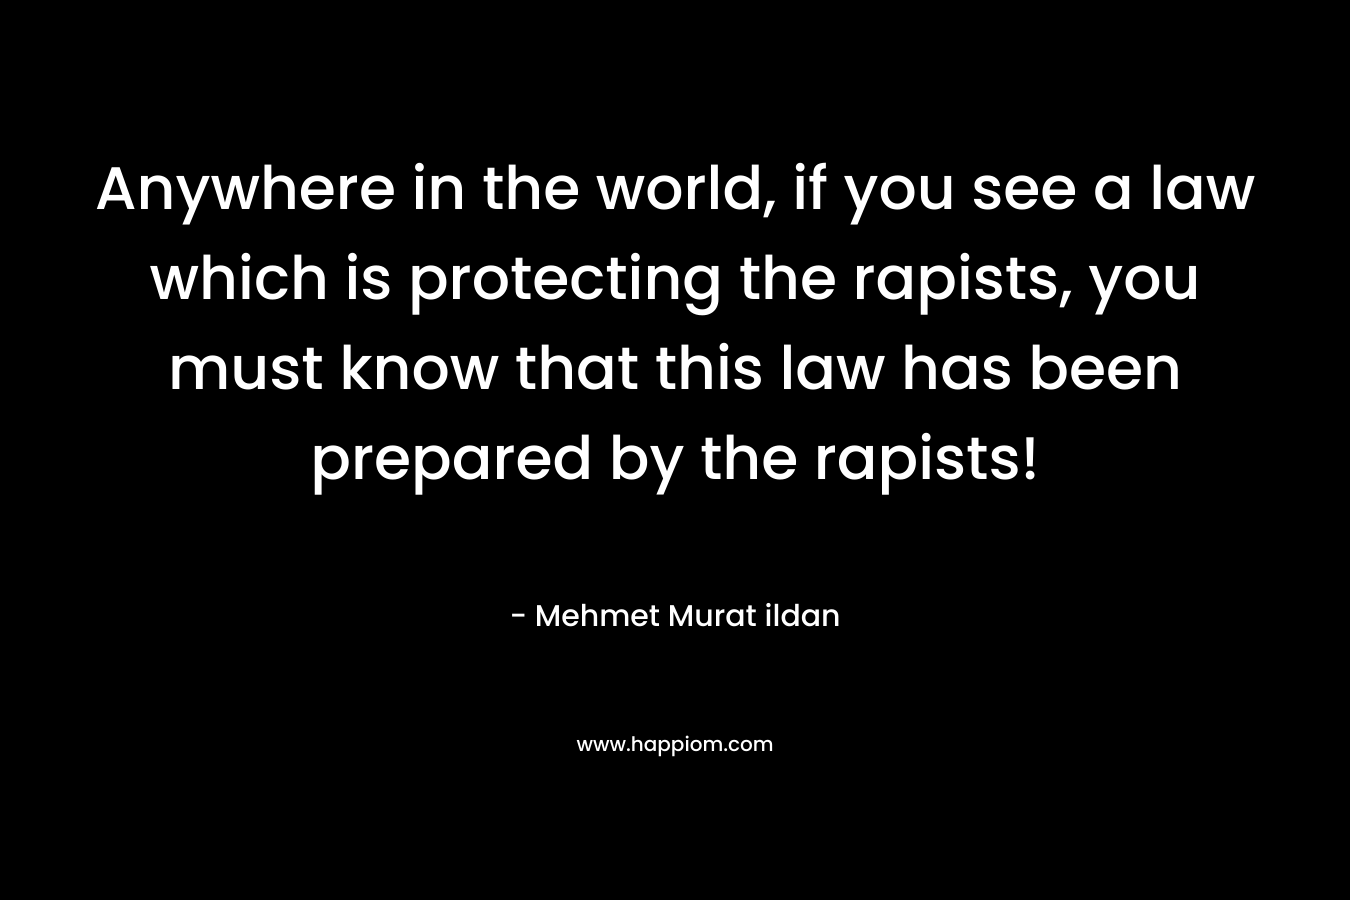 Anywhere in the world, if you see a law which is protecting the rapists, you must know that this law has been prepared by the rapists! – Mehmet Murat ildan